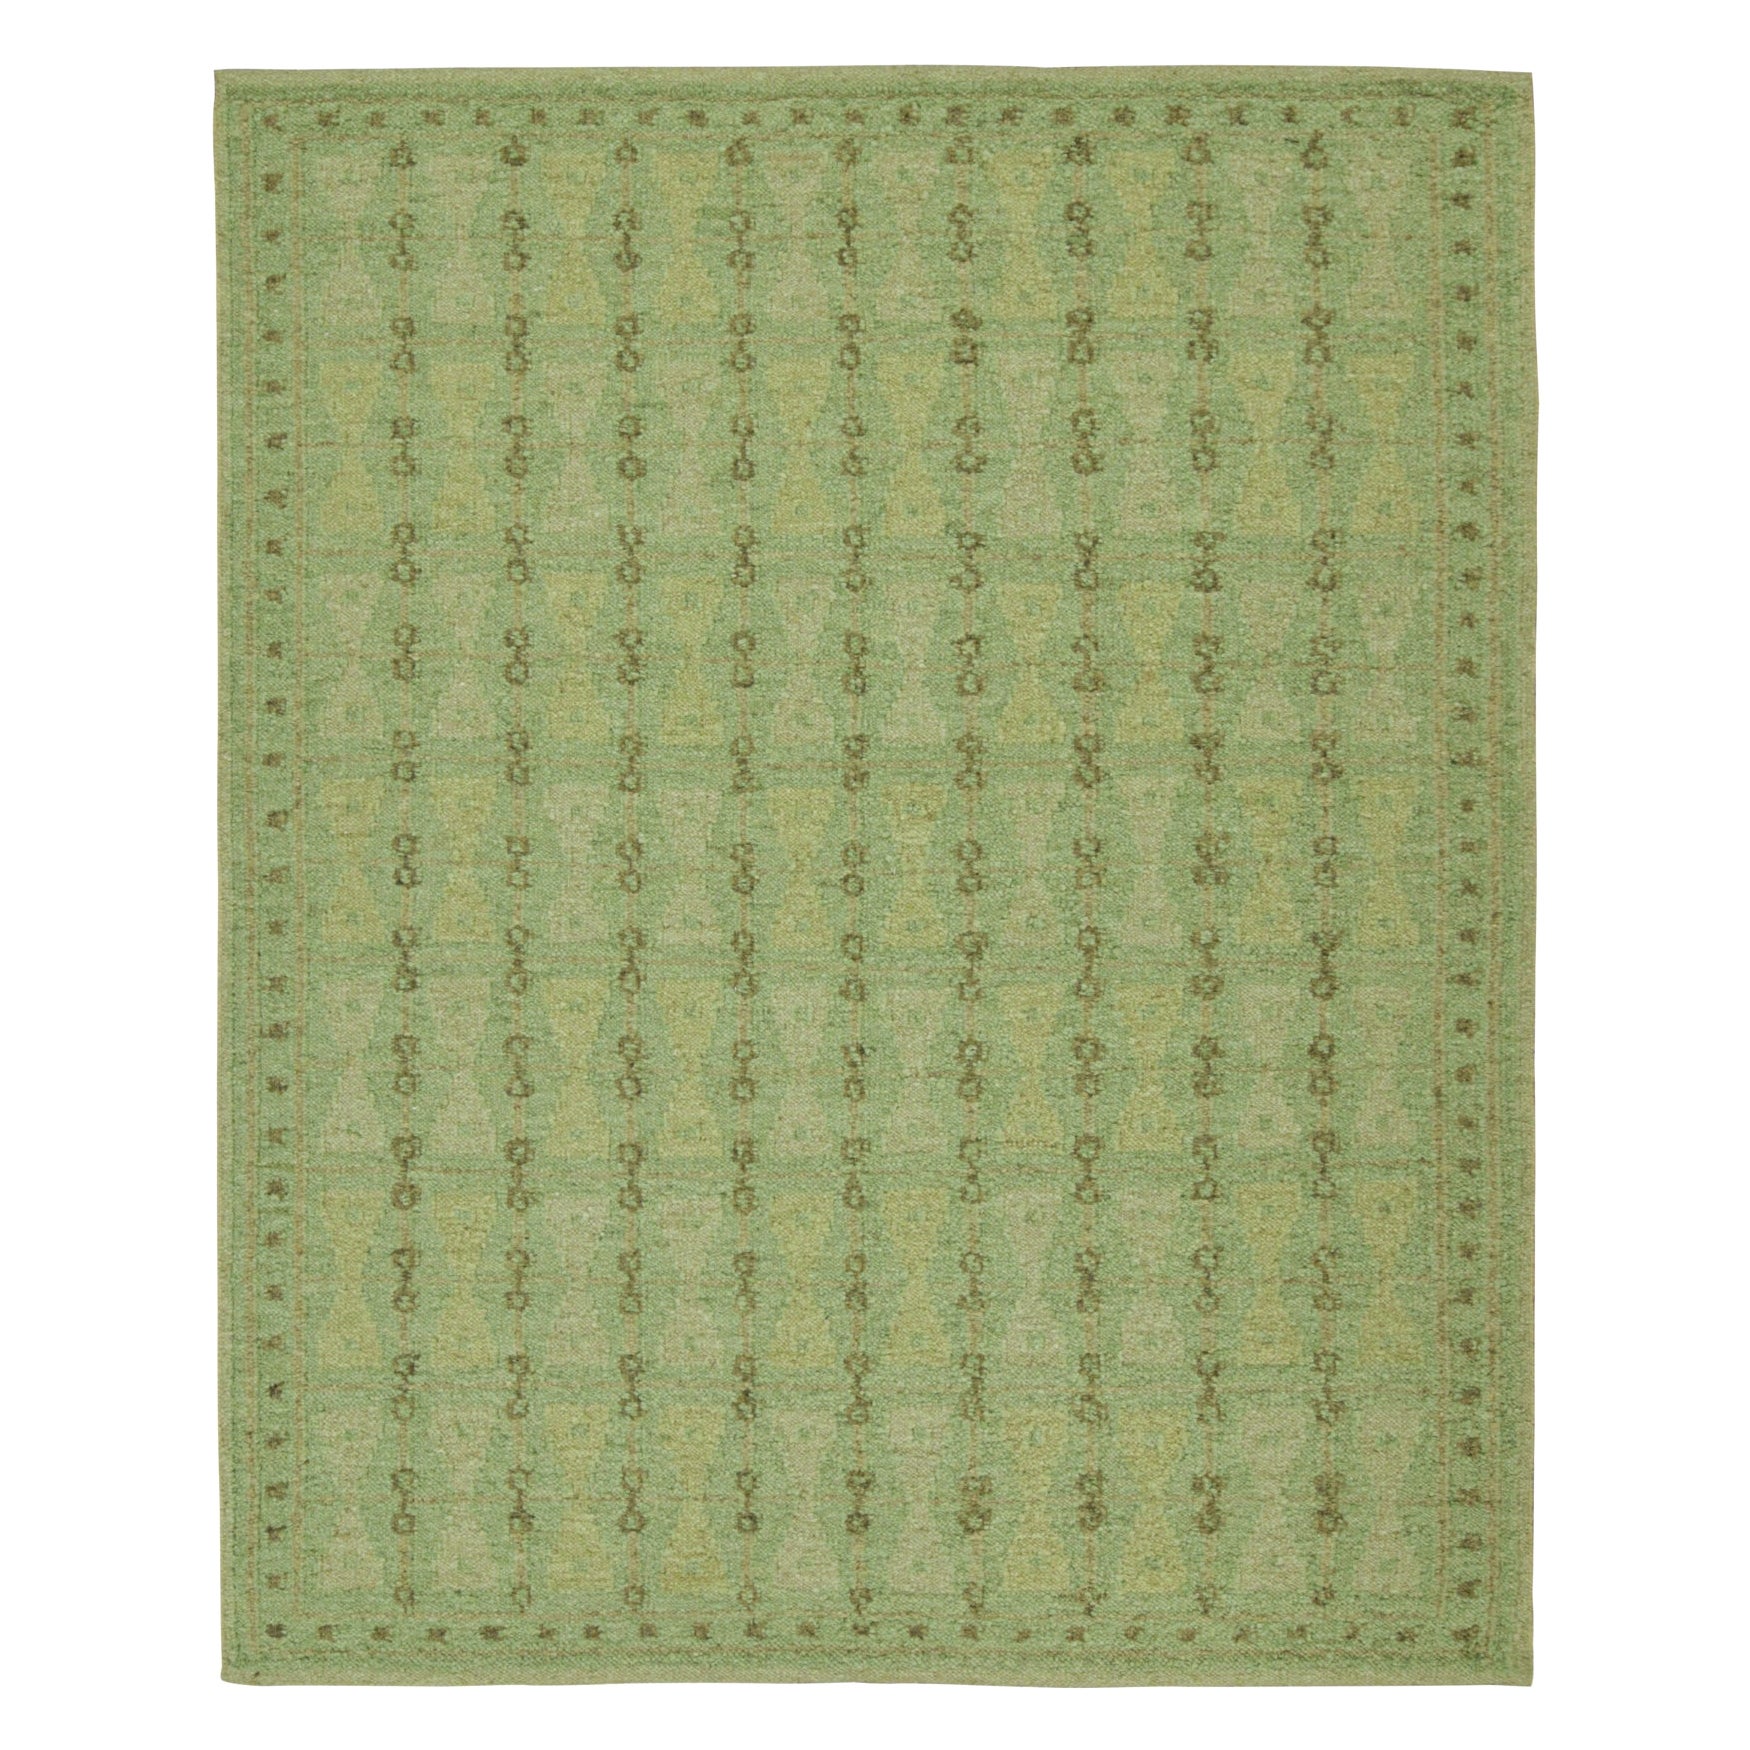 Rug & Kilim’s Scandinavian Style Kilim with Geometric Patterns in Tones of Green